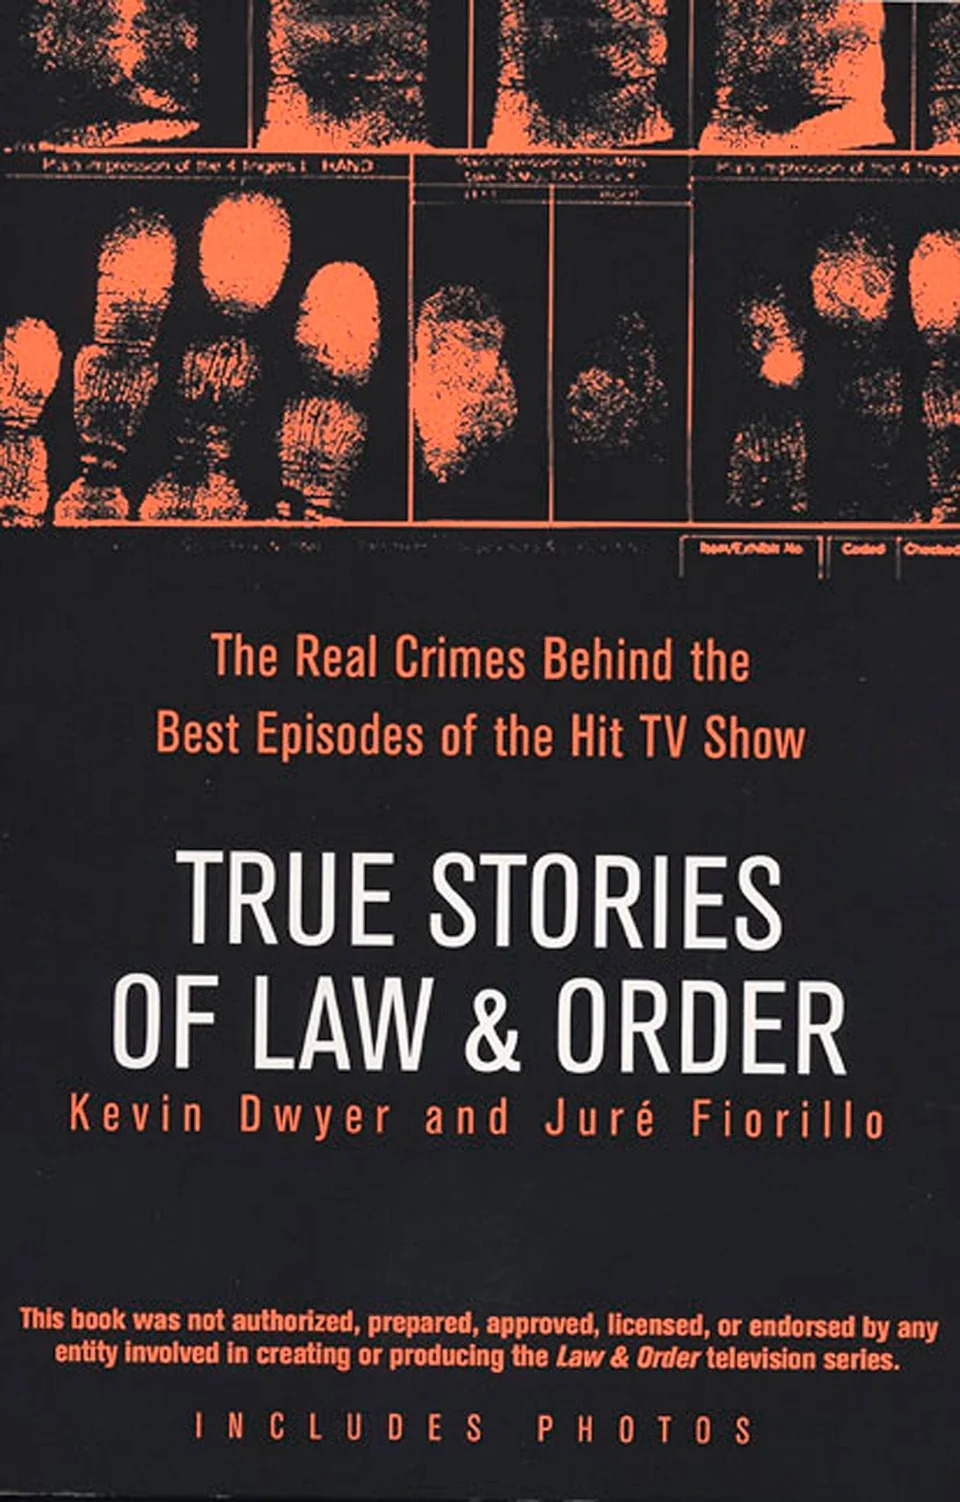 "True Stories of Law & Order"